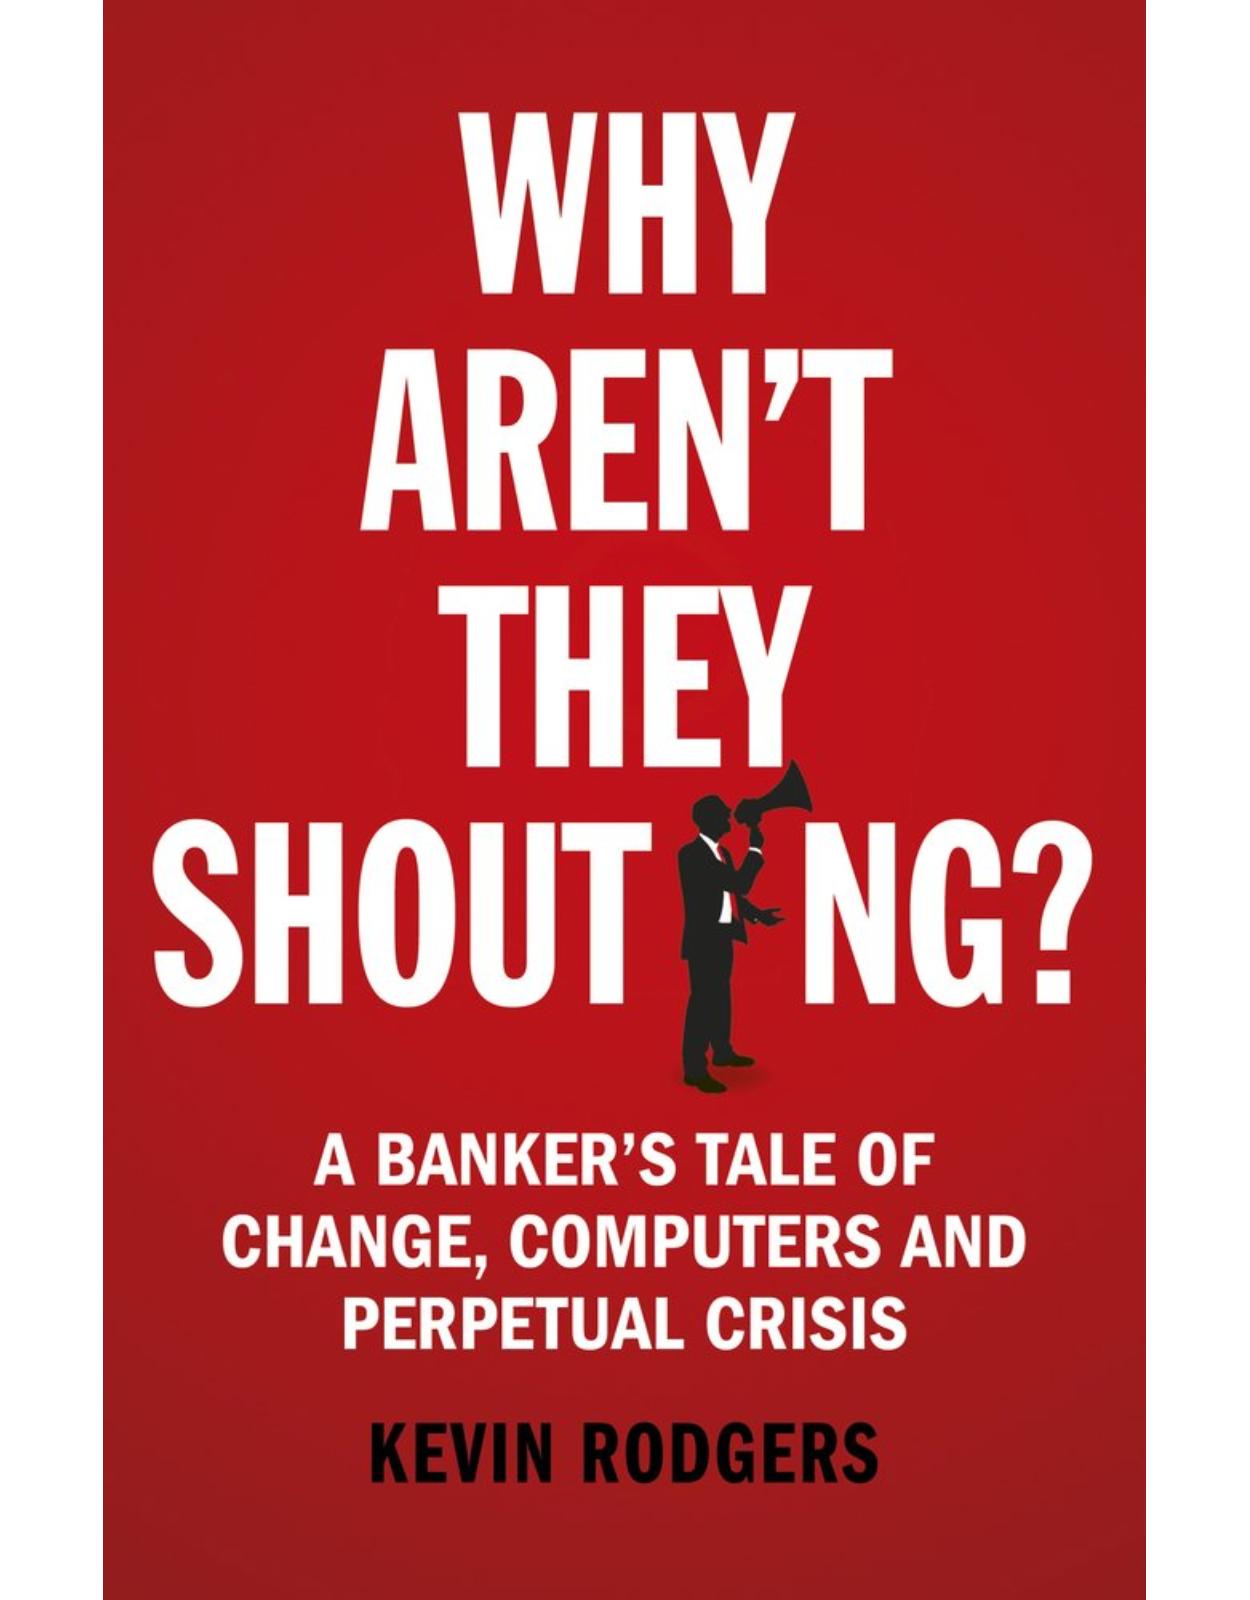 Why Aren't They Shouting?: A Banker’s Tale of Change, Computers and Perpetual Crisis